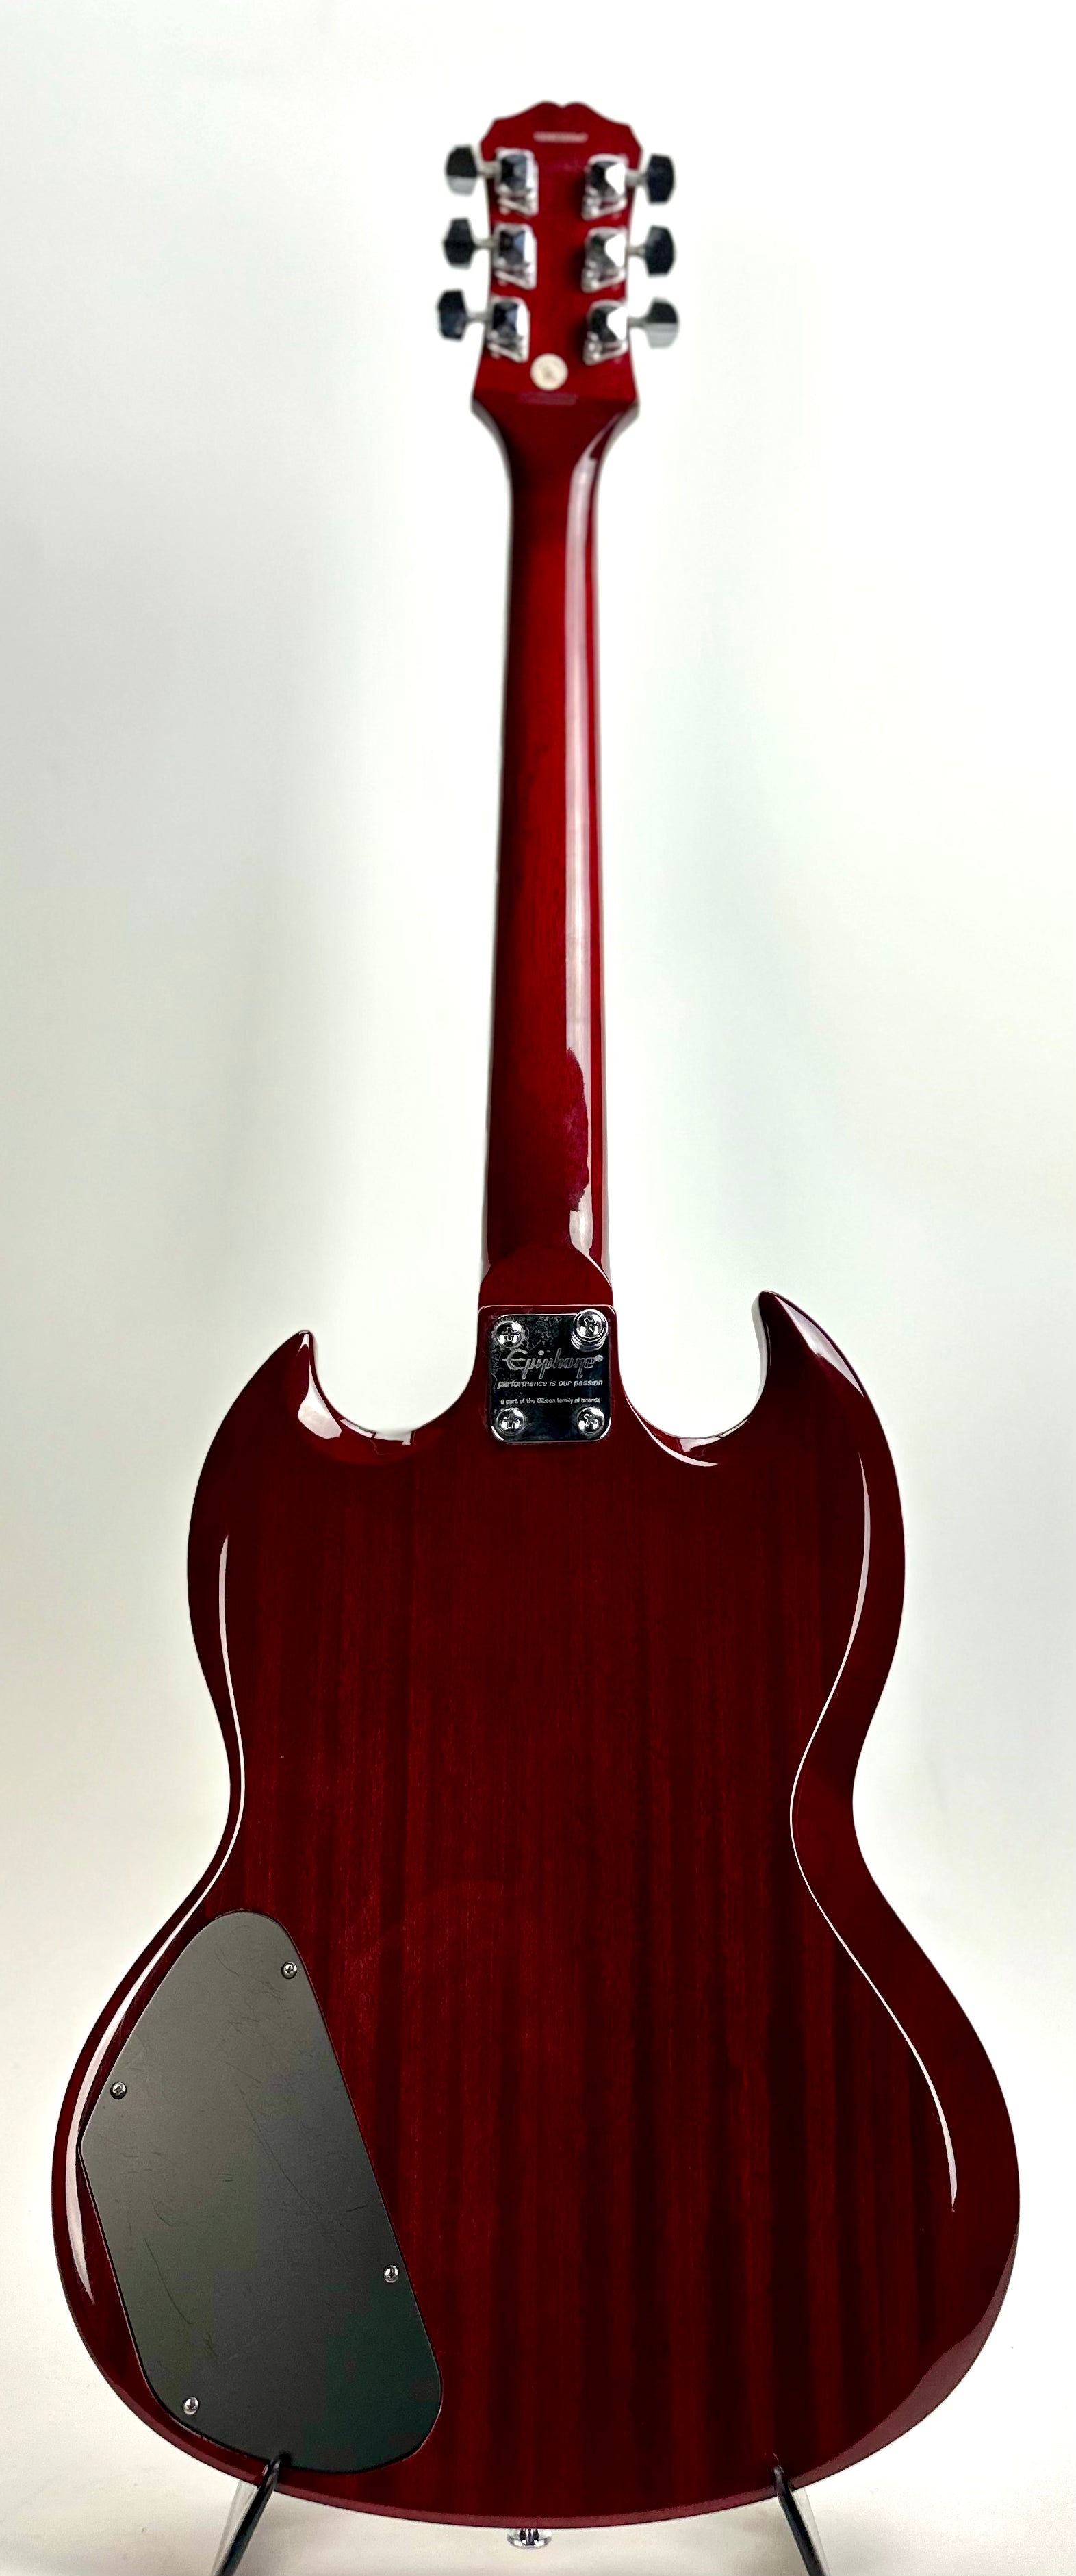 EPIPHONE SG-400 SPECIAL